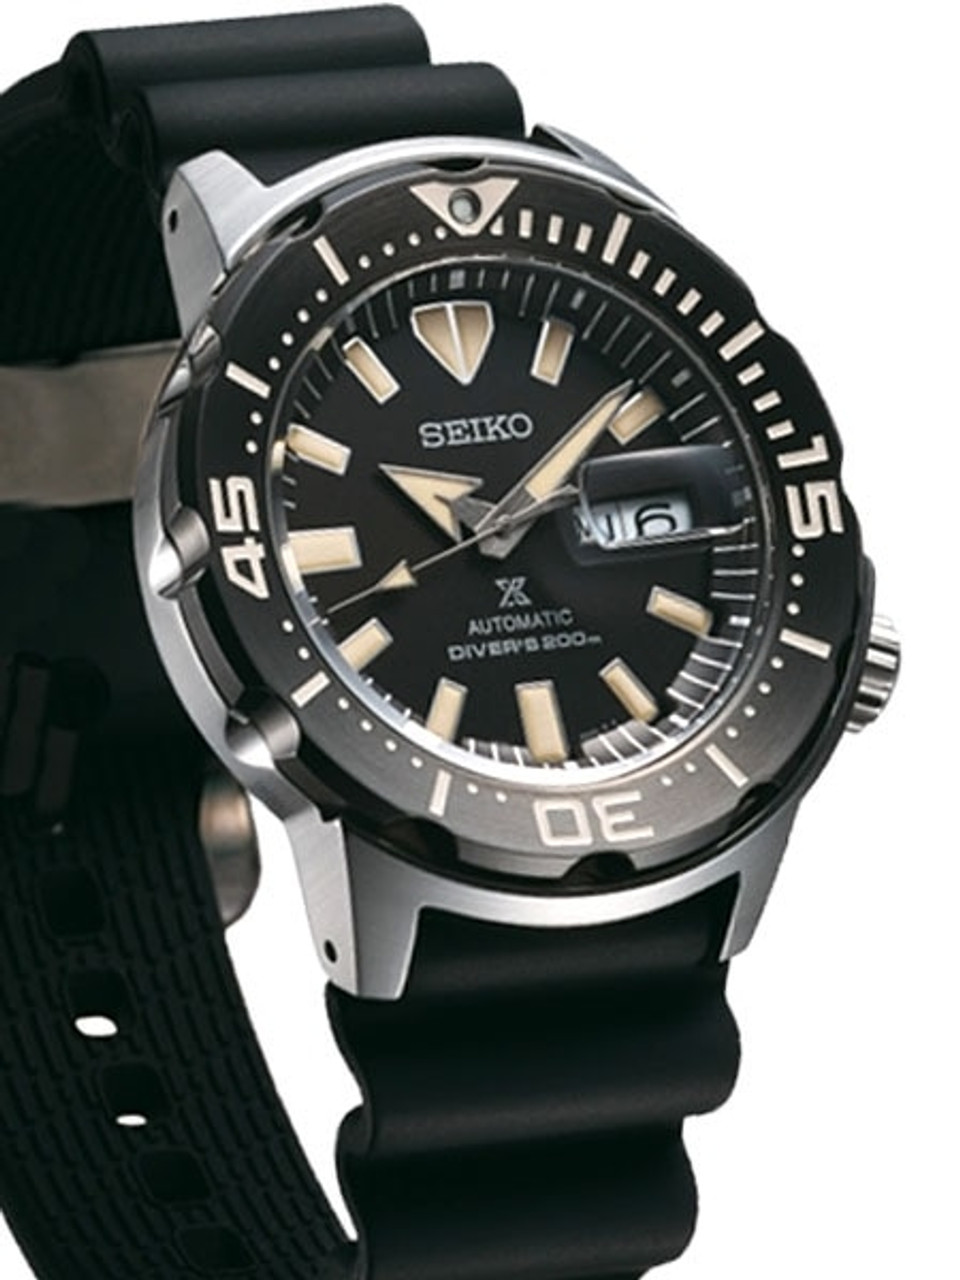 Seiko SRPD27 2019 Monster with new case design and 24-Jewel Automatic  Movement